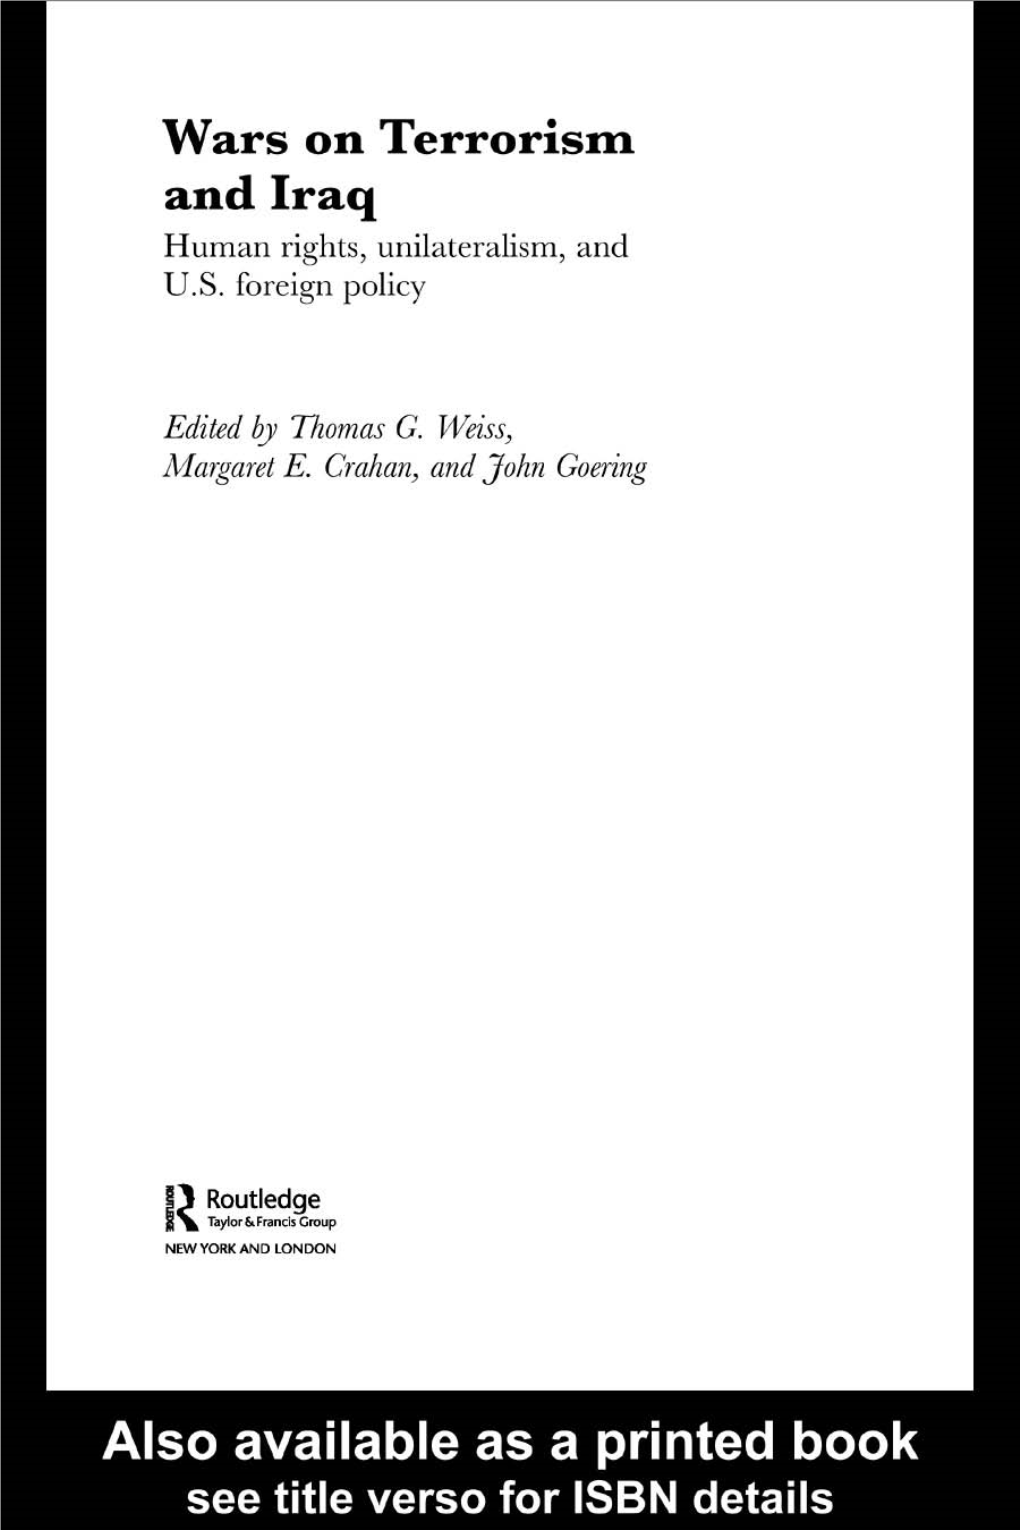 Wars on Terrorism and Iraq: Human Rights, Unilateralism, and U.S. Foreign Policy/Edited by Thomas G